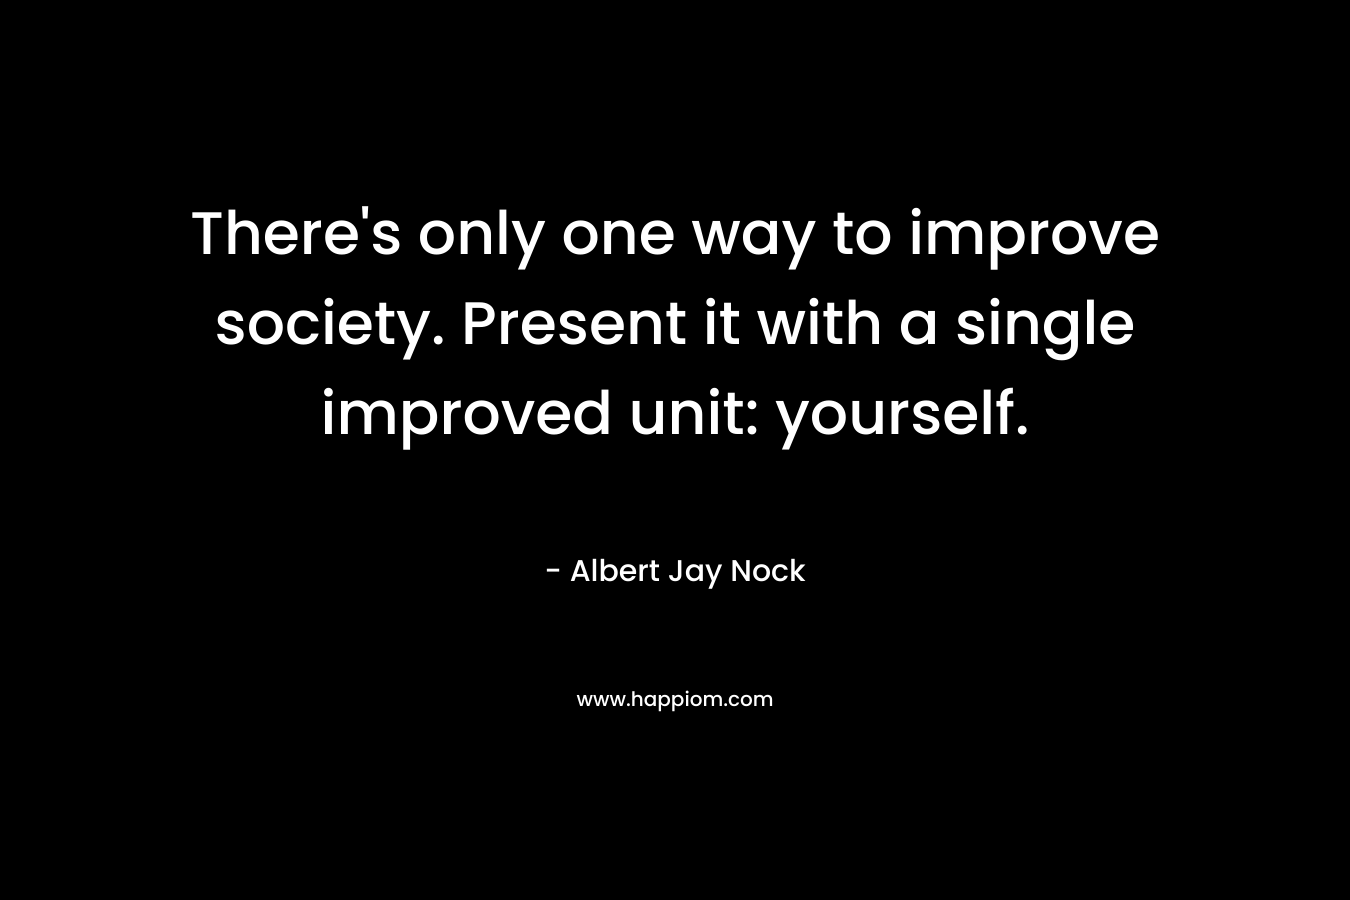 There’s only one way to improve society. Present it with a single improved unit: yourself. – Albert Jay Nock